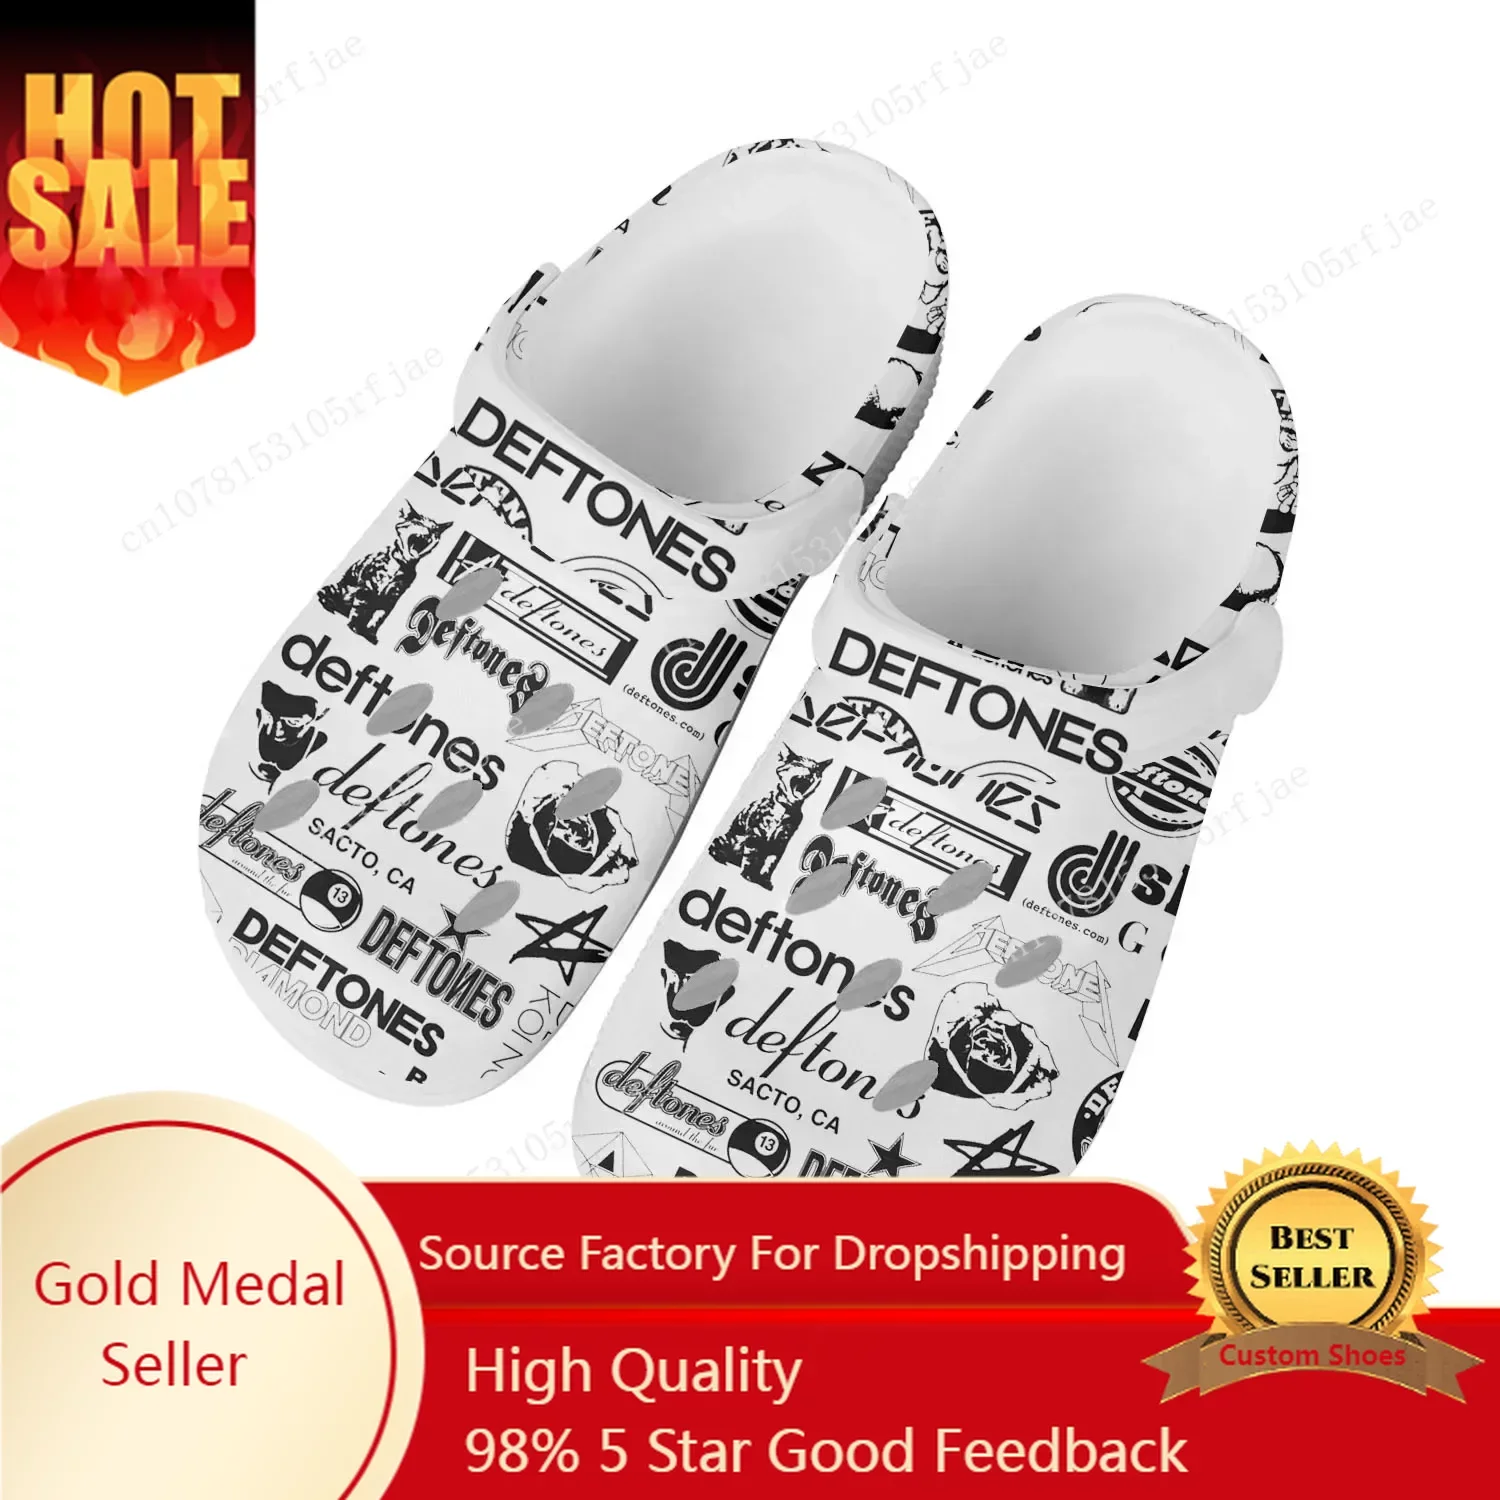 

Deftones Metal Art Rock Band Home Clogs Custom Water Shoes Mens Womens Teenager Shoe Garden Clog Breathable Beach Hole Slippers